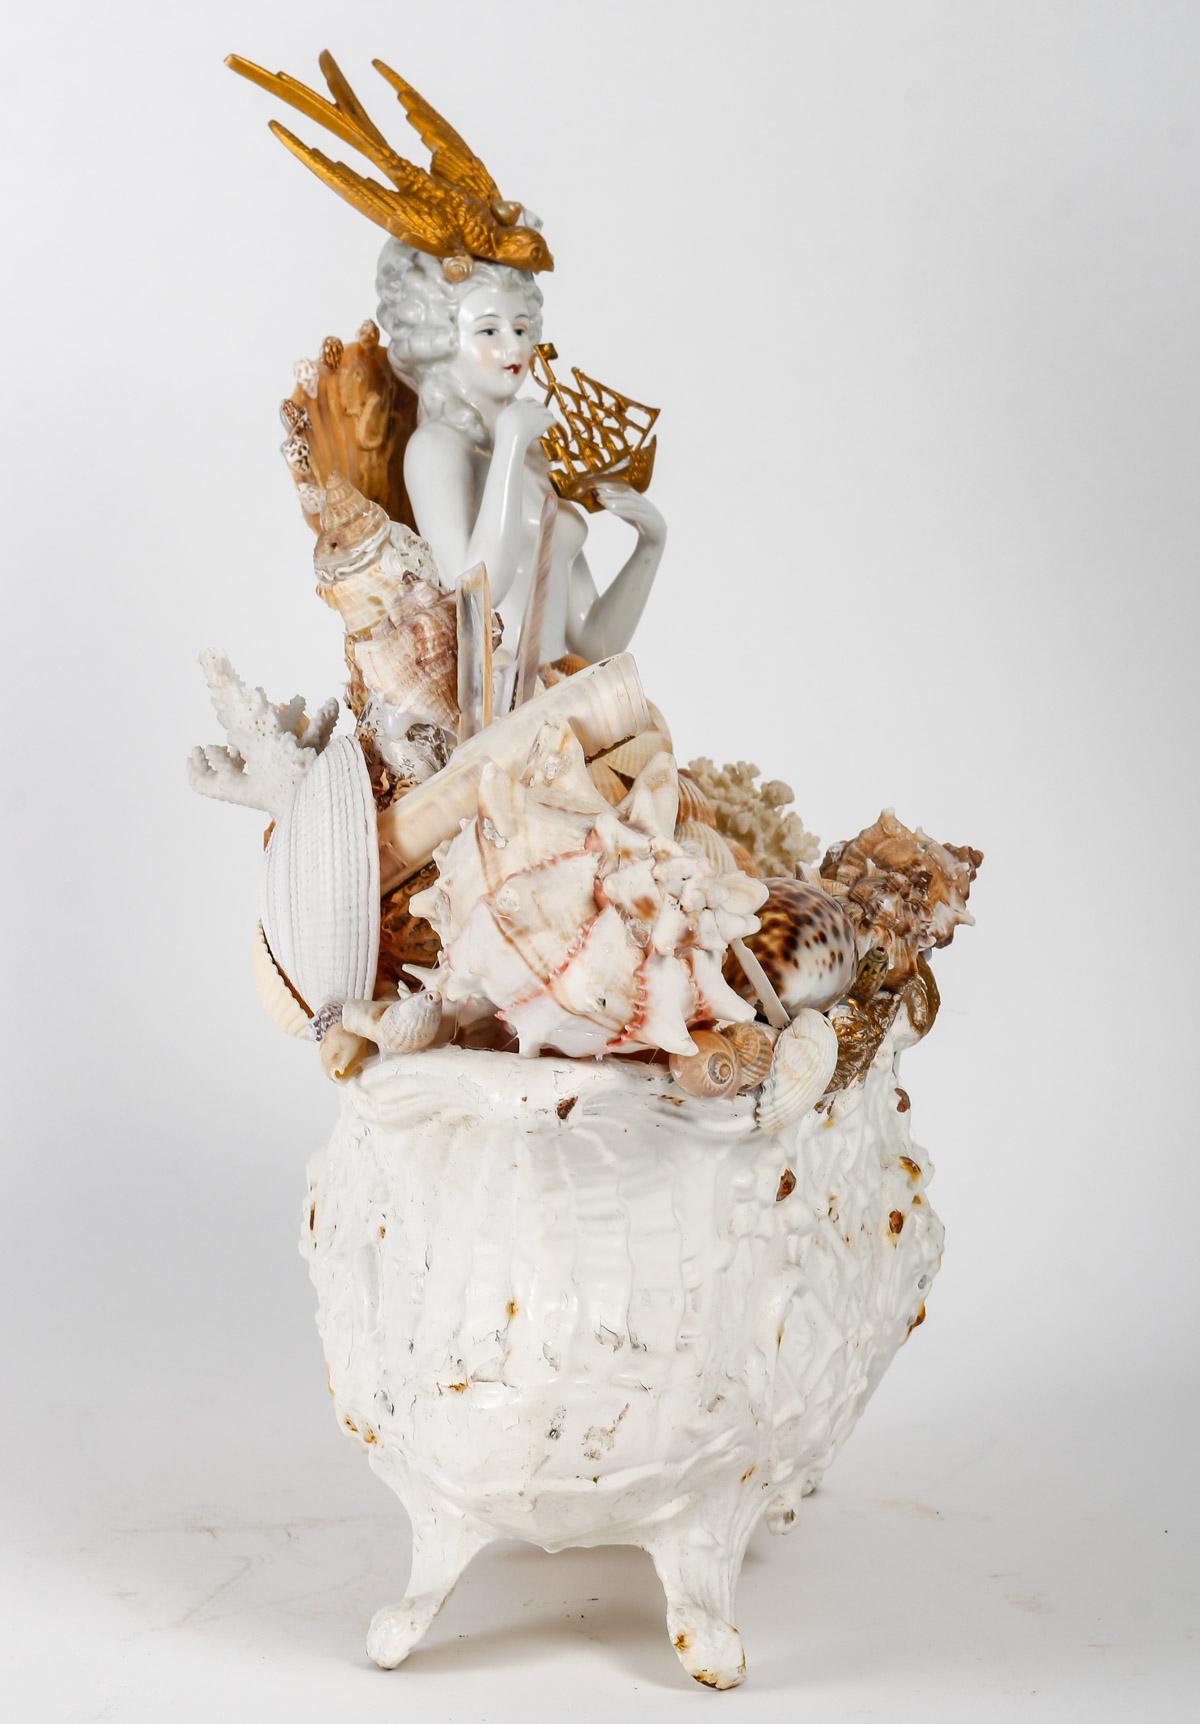 Shell sculpture and planter in cast iron and porcelain.

Sculpture composed of a cast iron planter decorated with shells and a porcelain figure, 20th century.
h: 41cm, l: 45cm, p: 20cm
